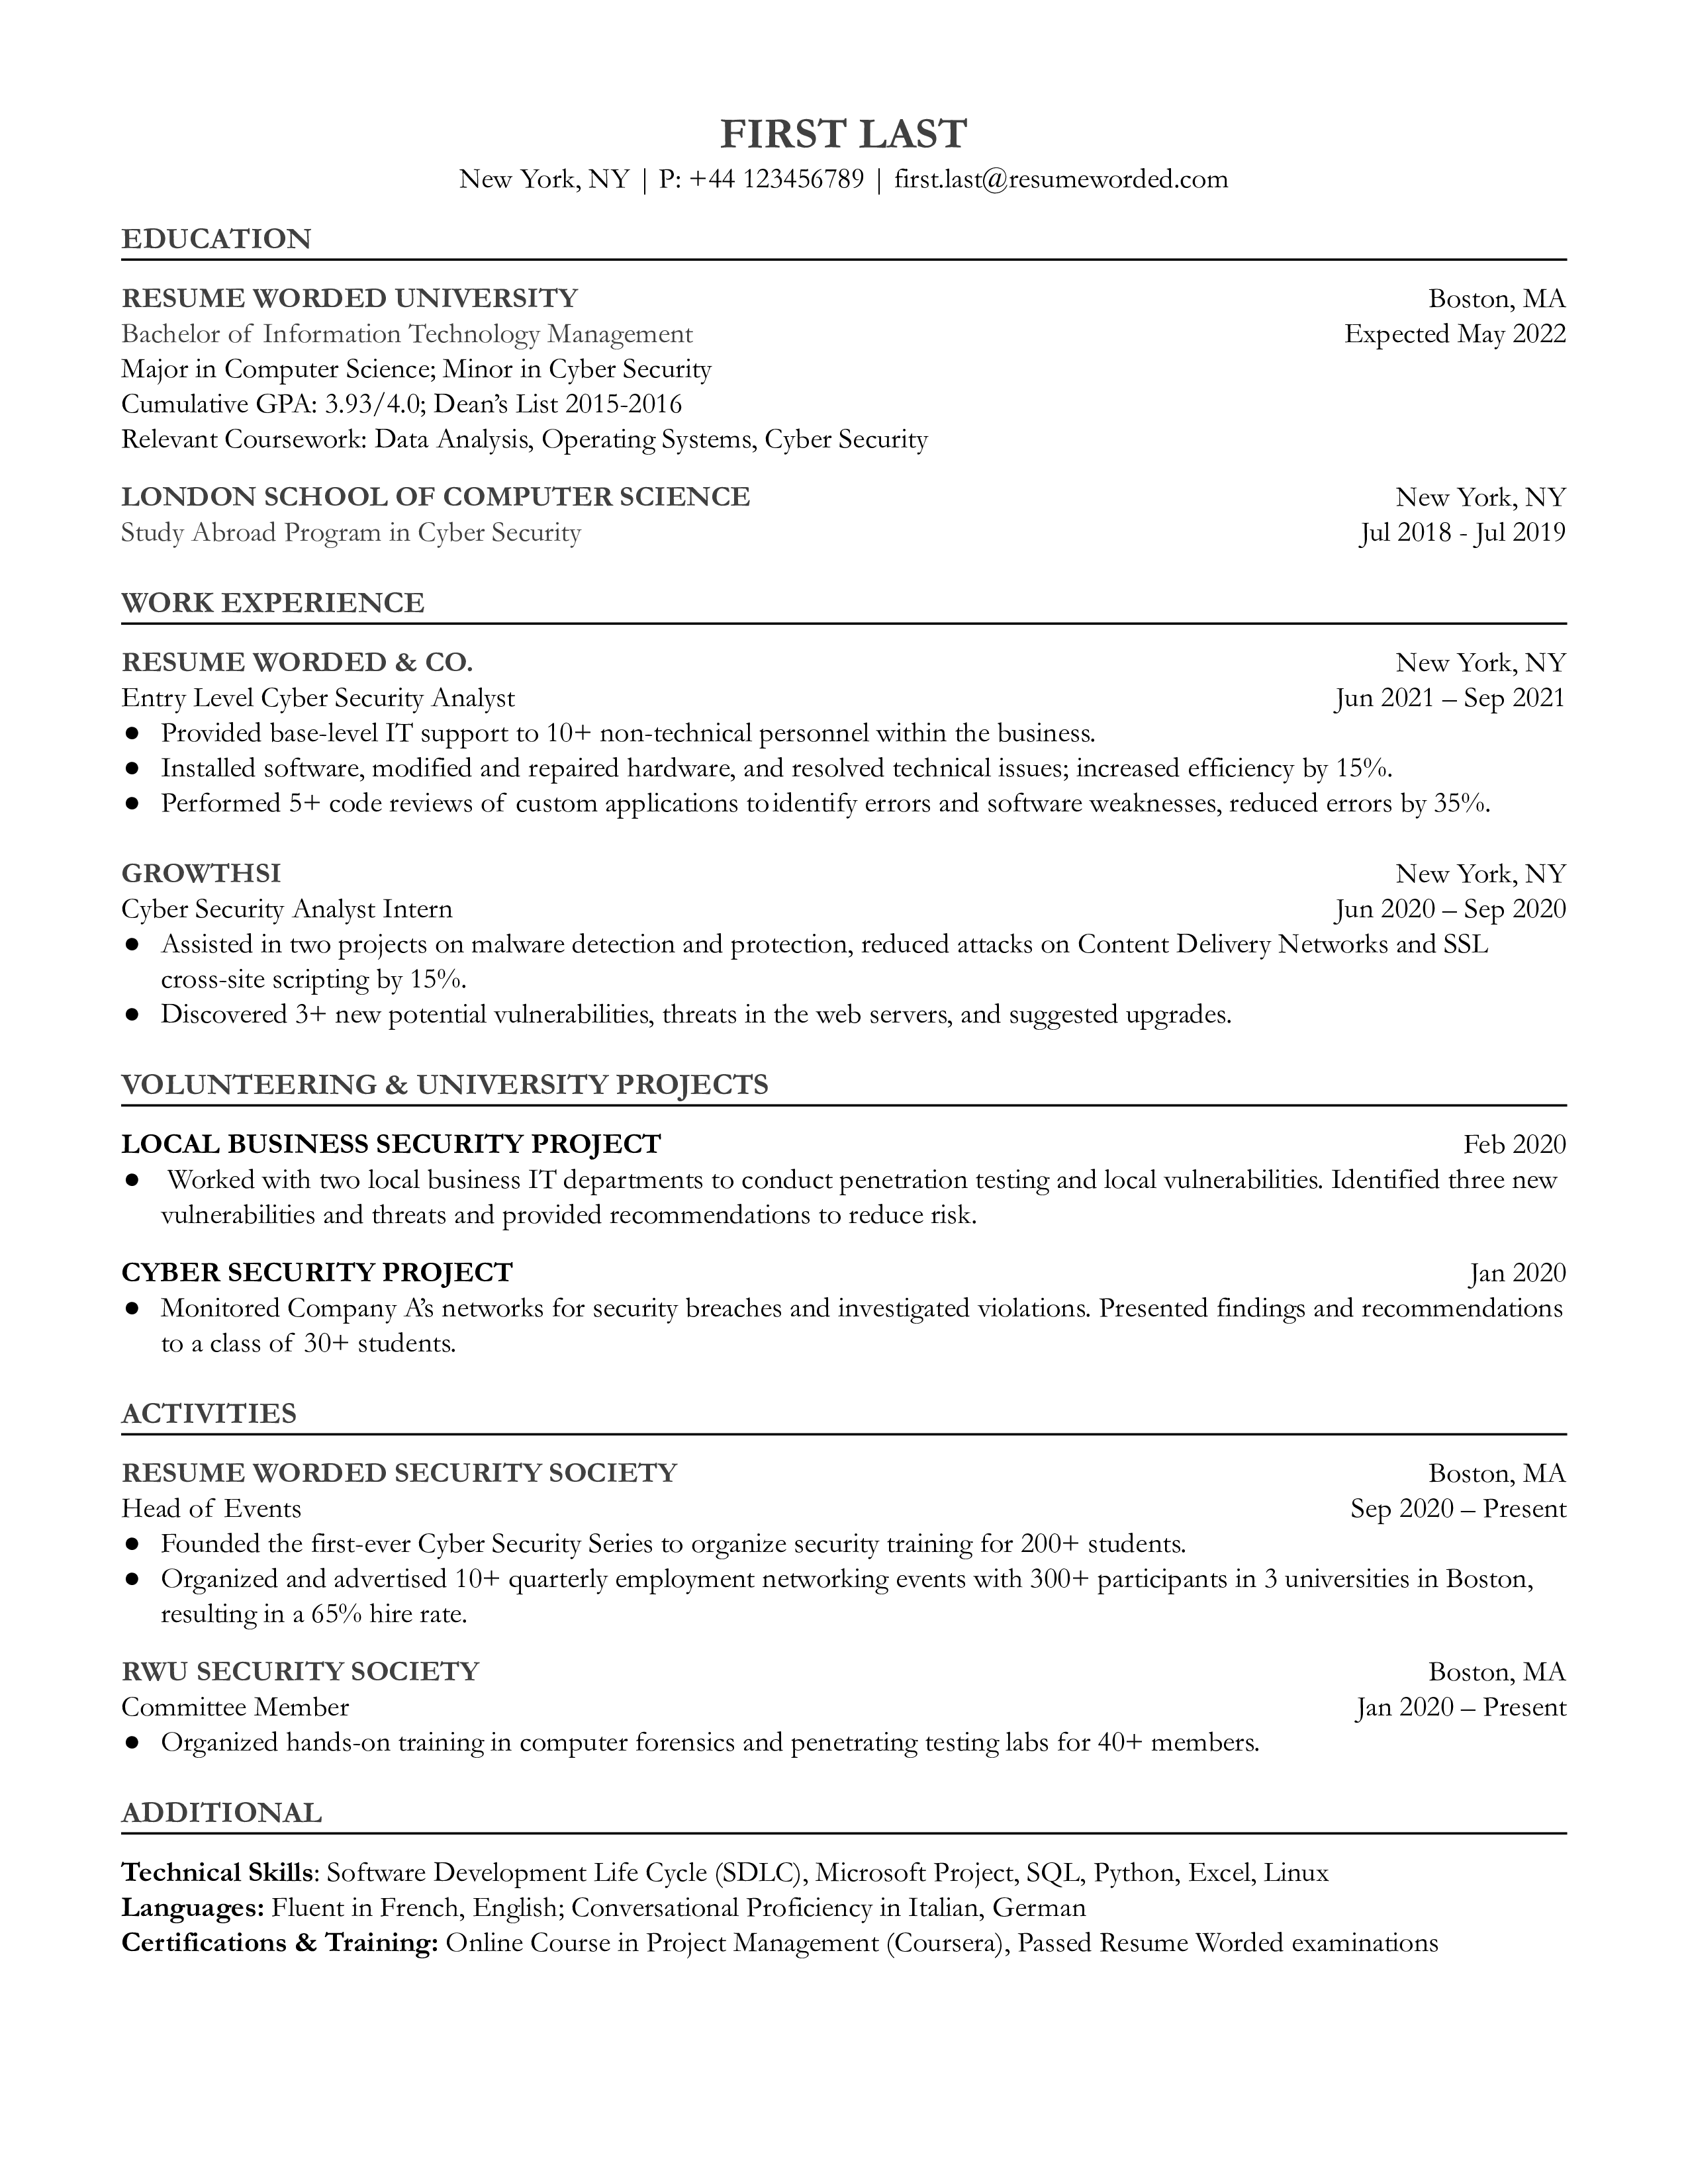 Entry-level cybersecurity analyst resume example